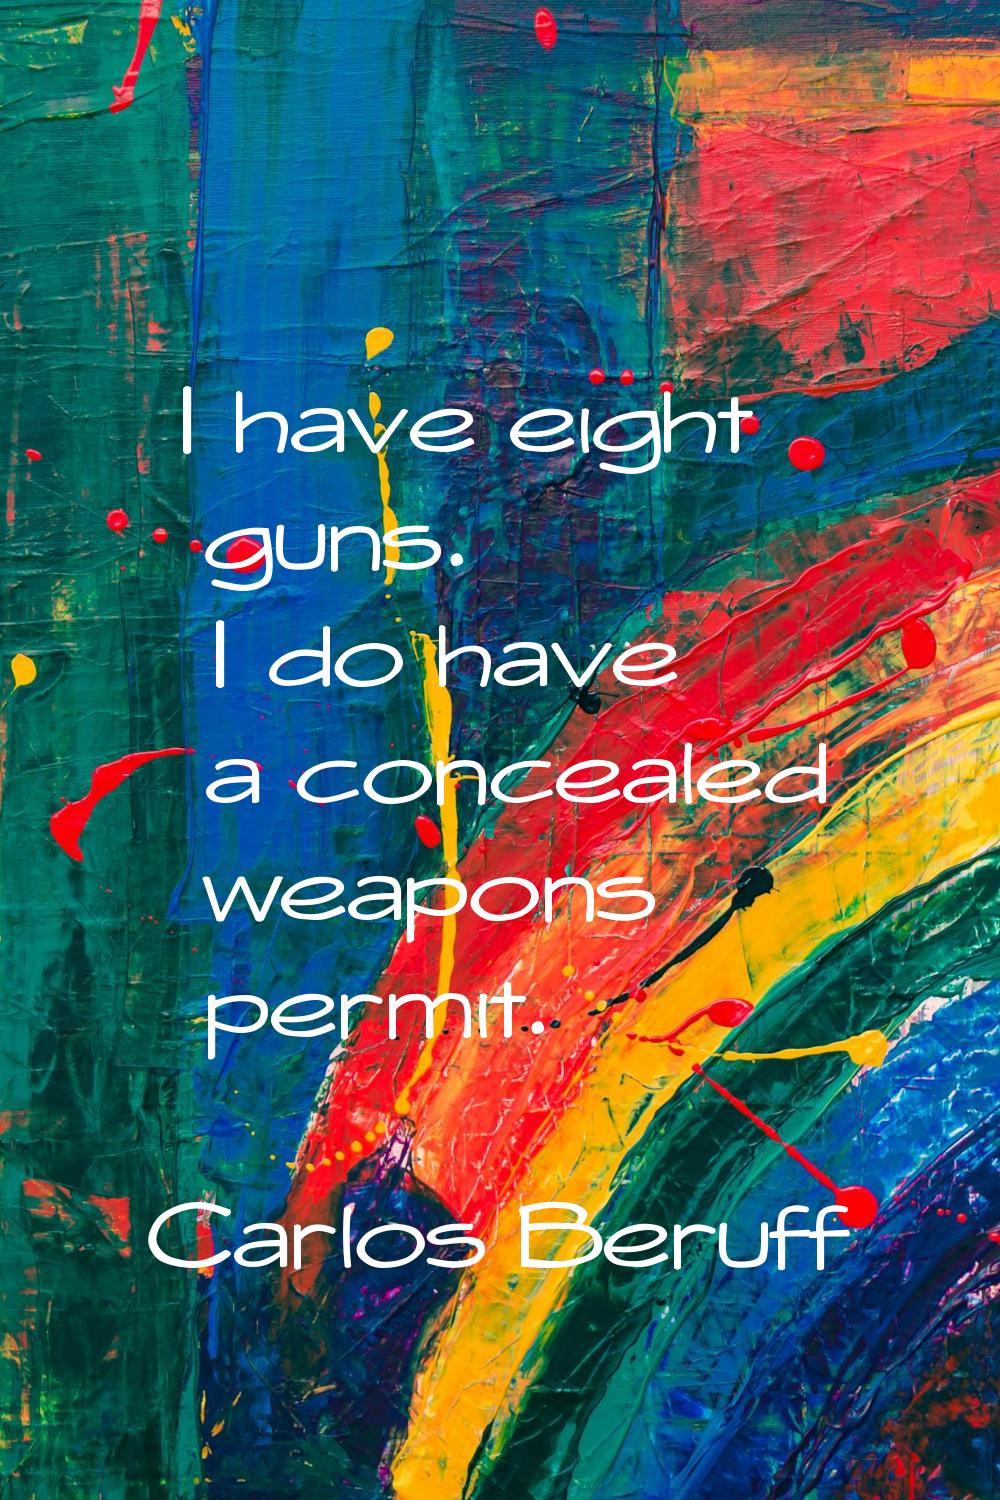 I have eight guns. I do have a concealed weapons permit.